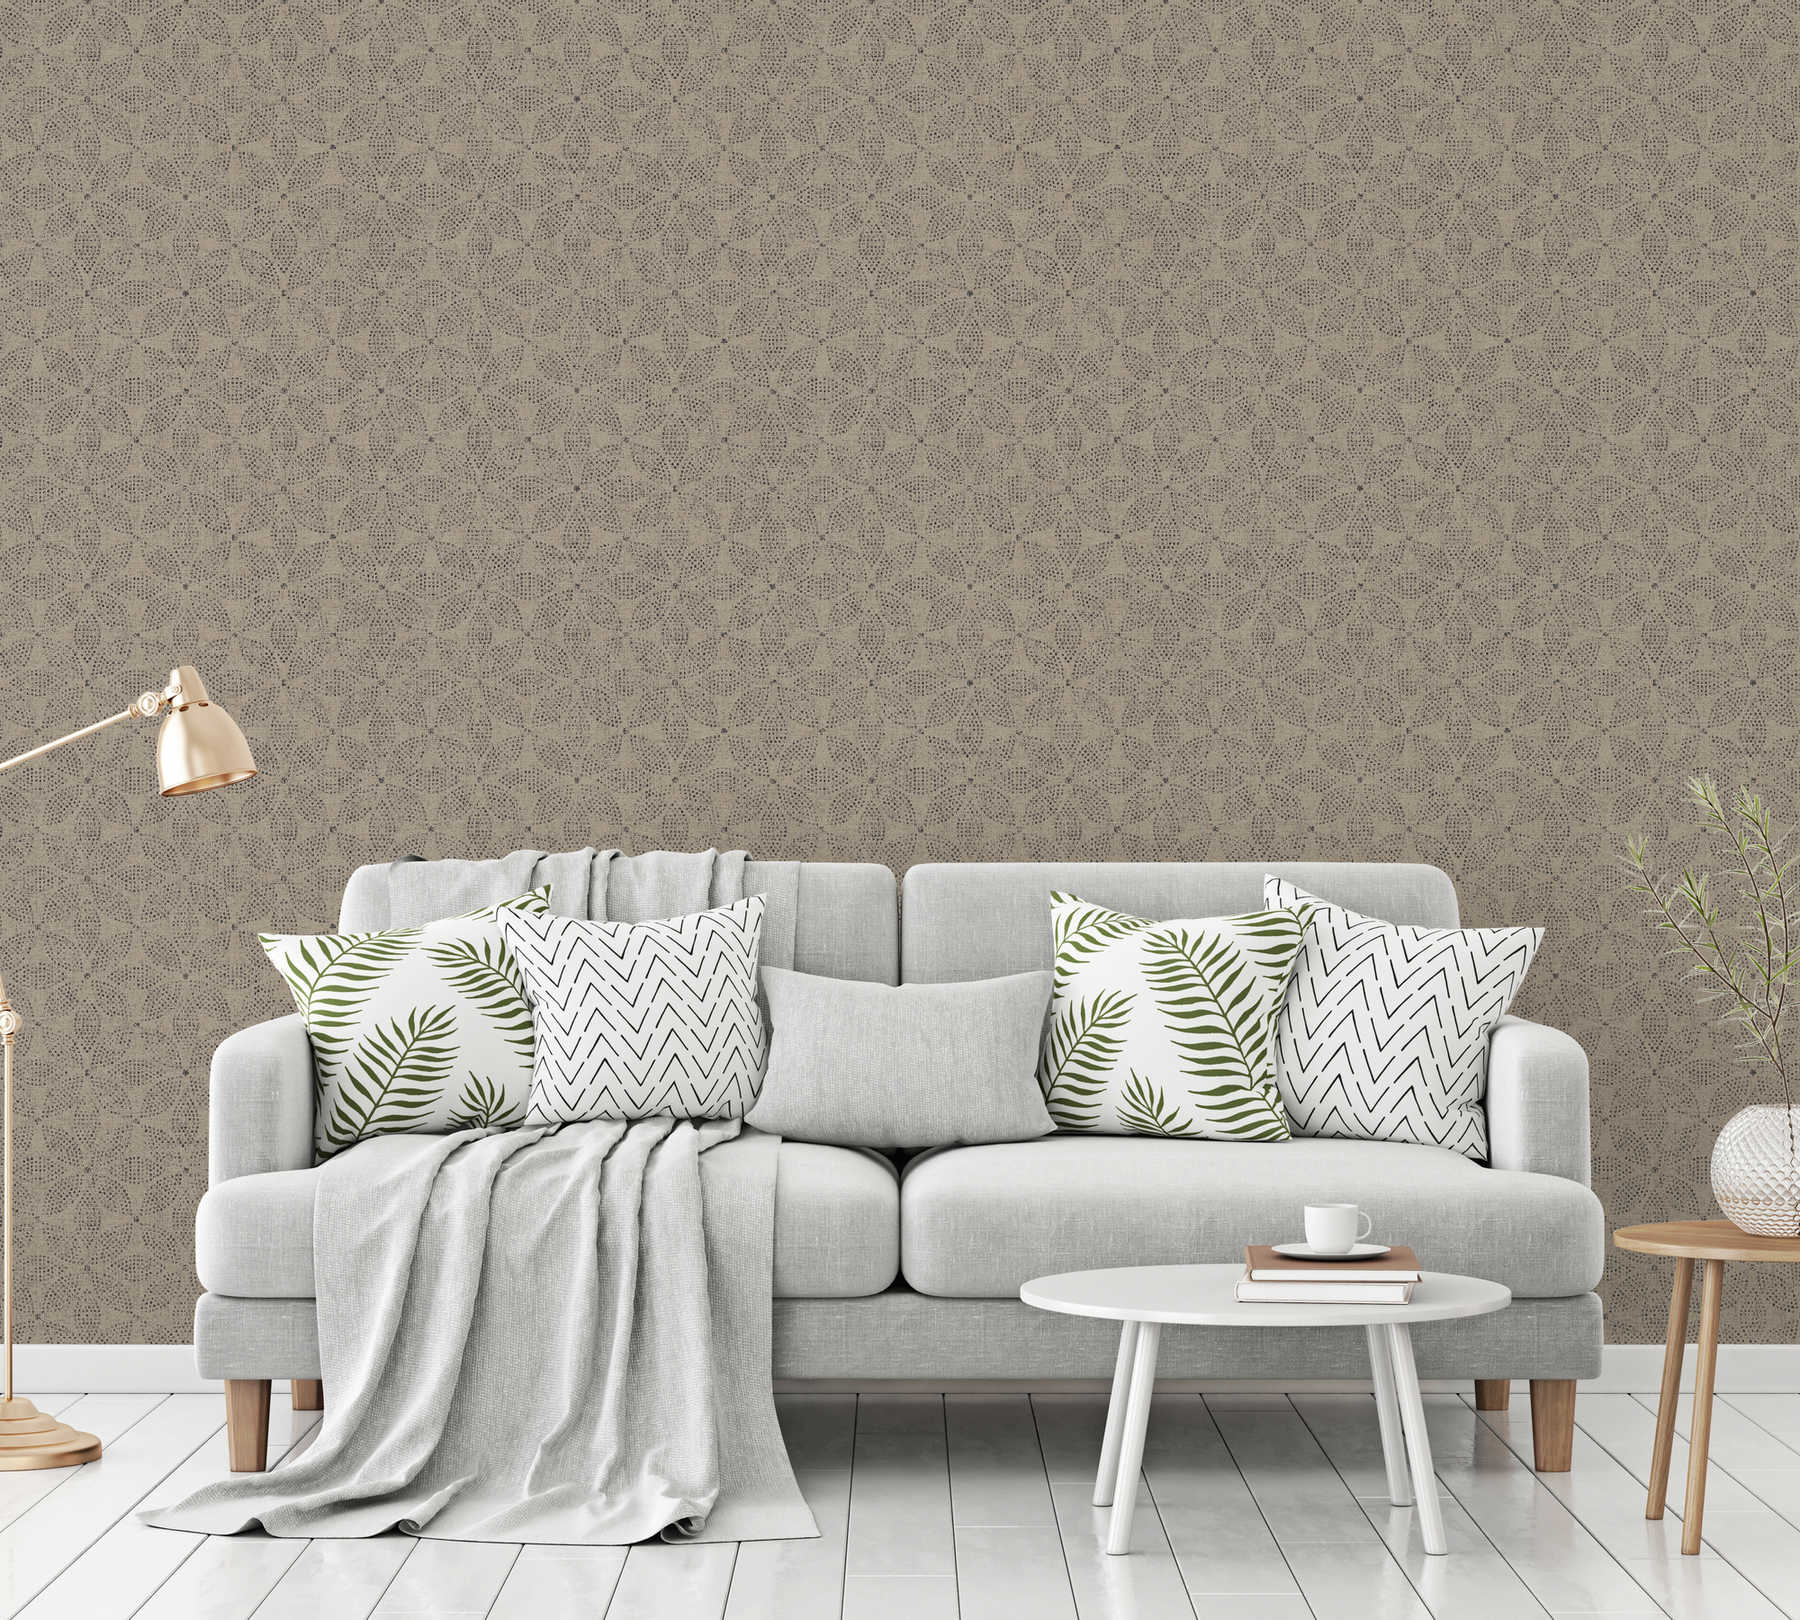             wallpaper African Style graphic dot painting - black, beige, grey
        